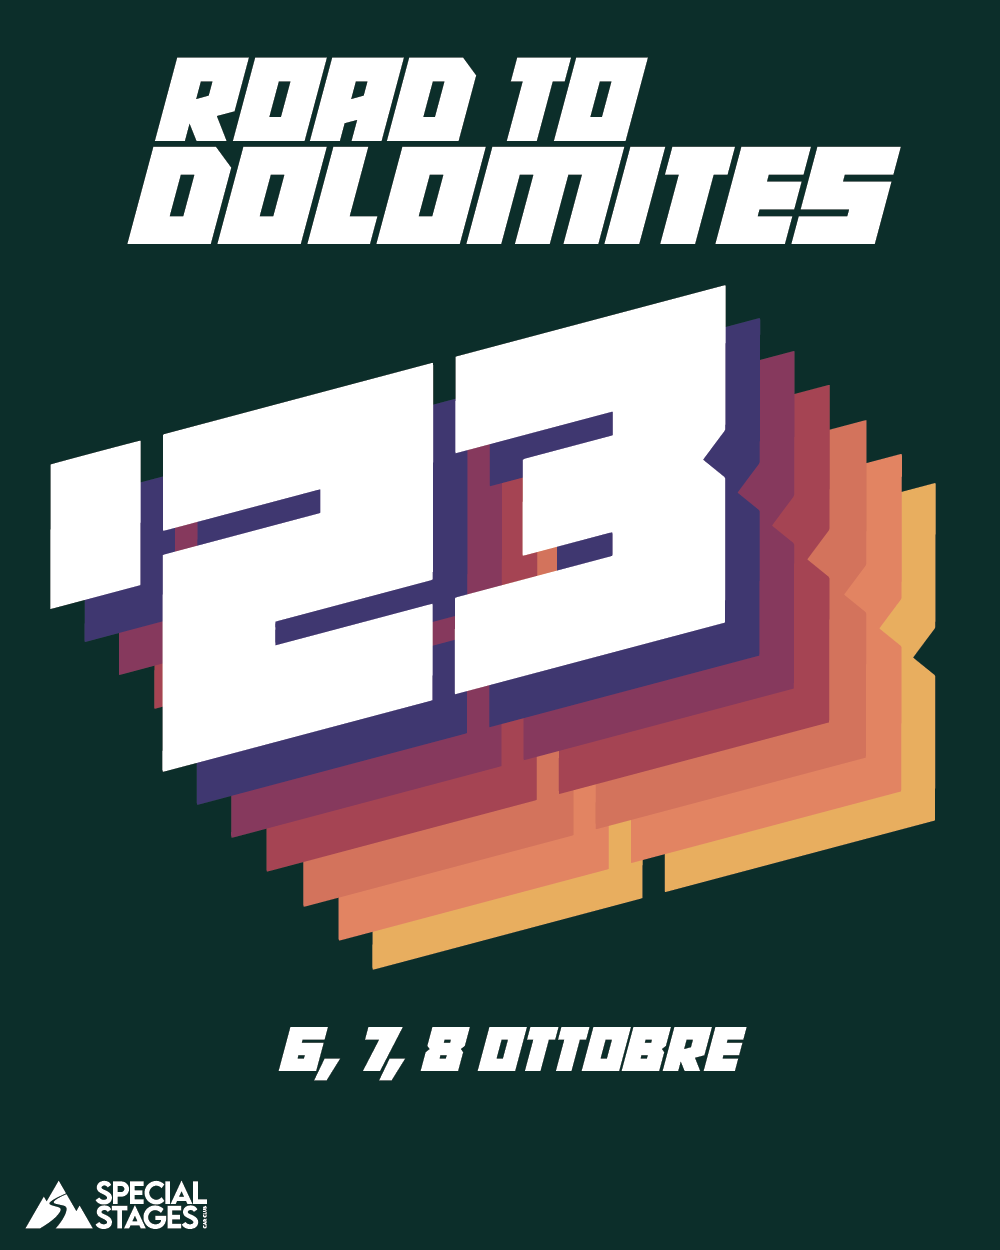 Road to Dolomites 2023 - 6-7-8 Ottobre - Special Stages